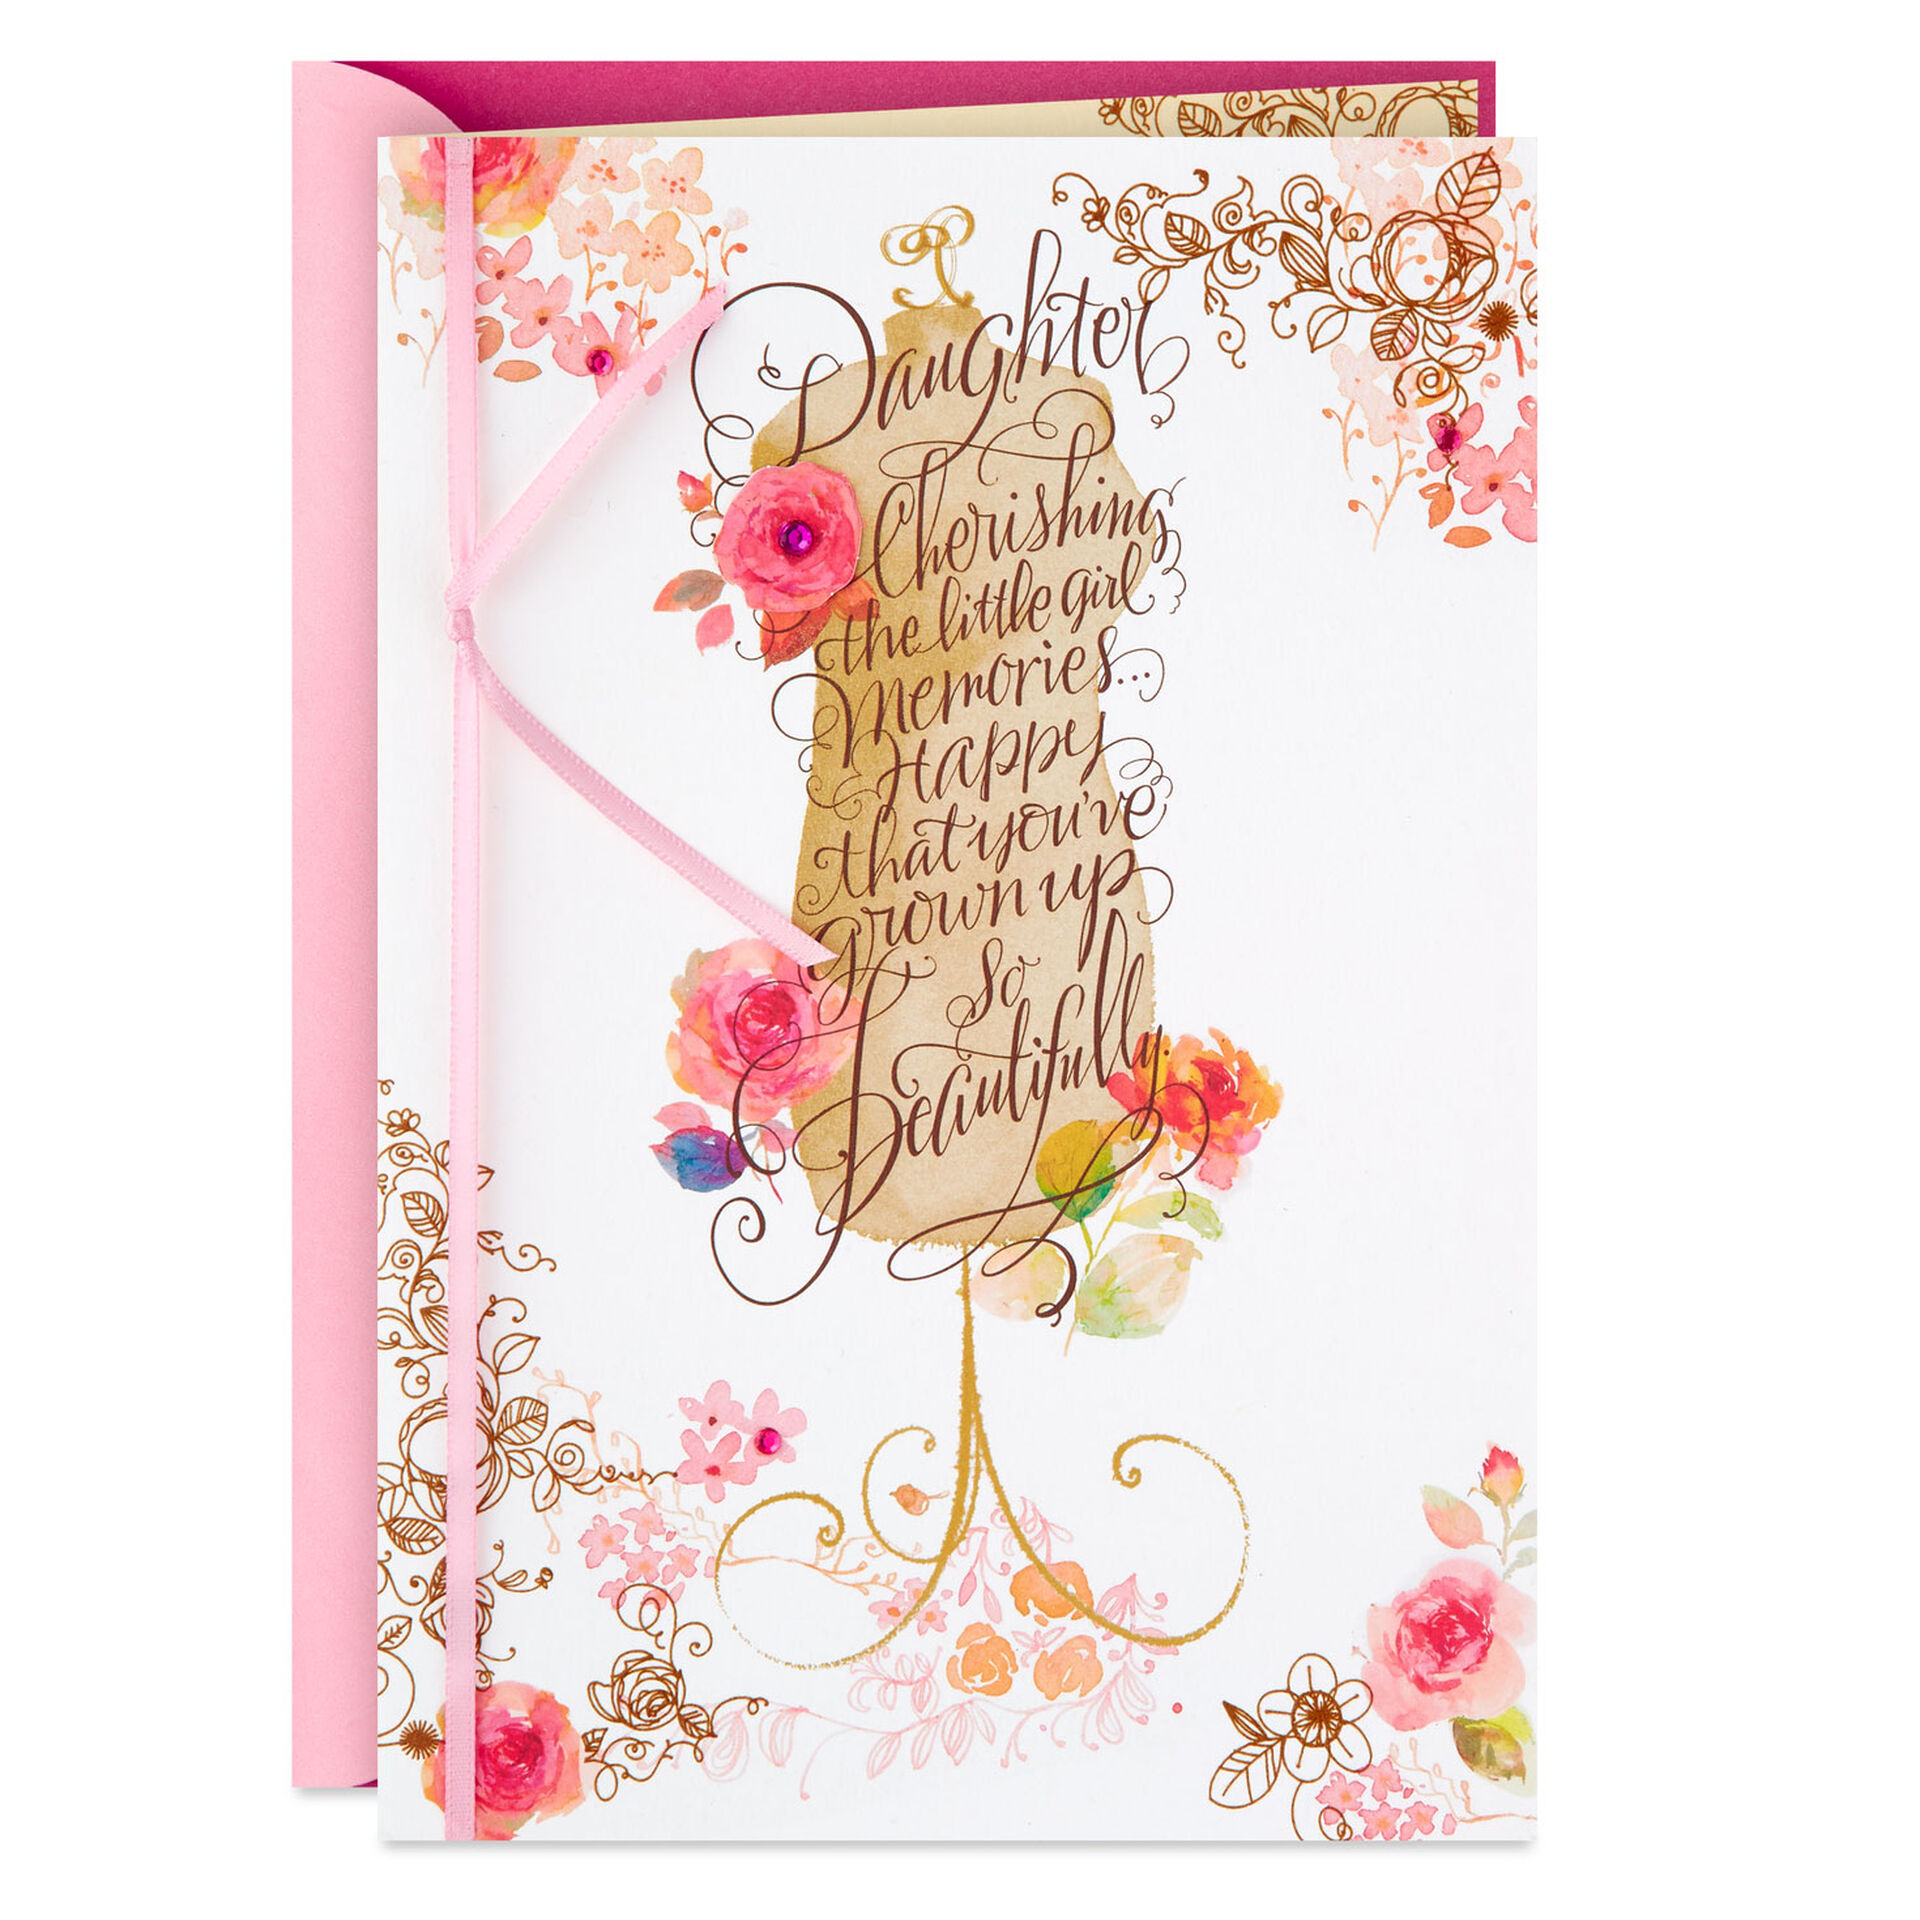 Dress-Form-and-Flowers-Birthday-Card-for-Daughter_659FBD3627_01